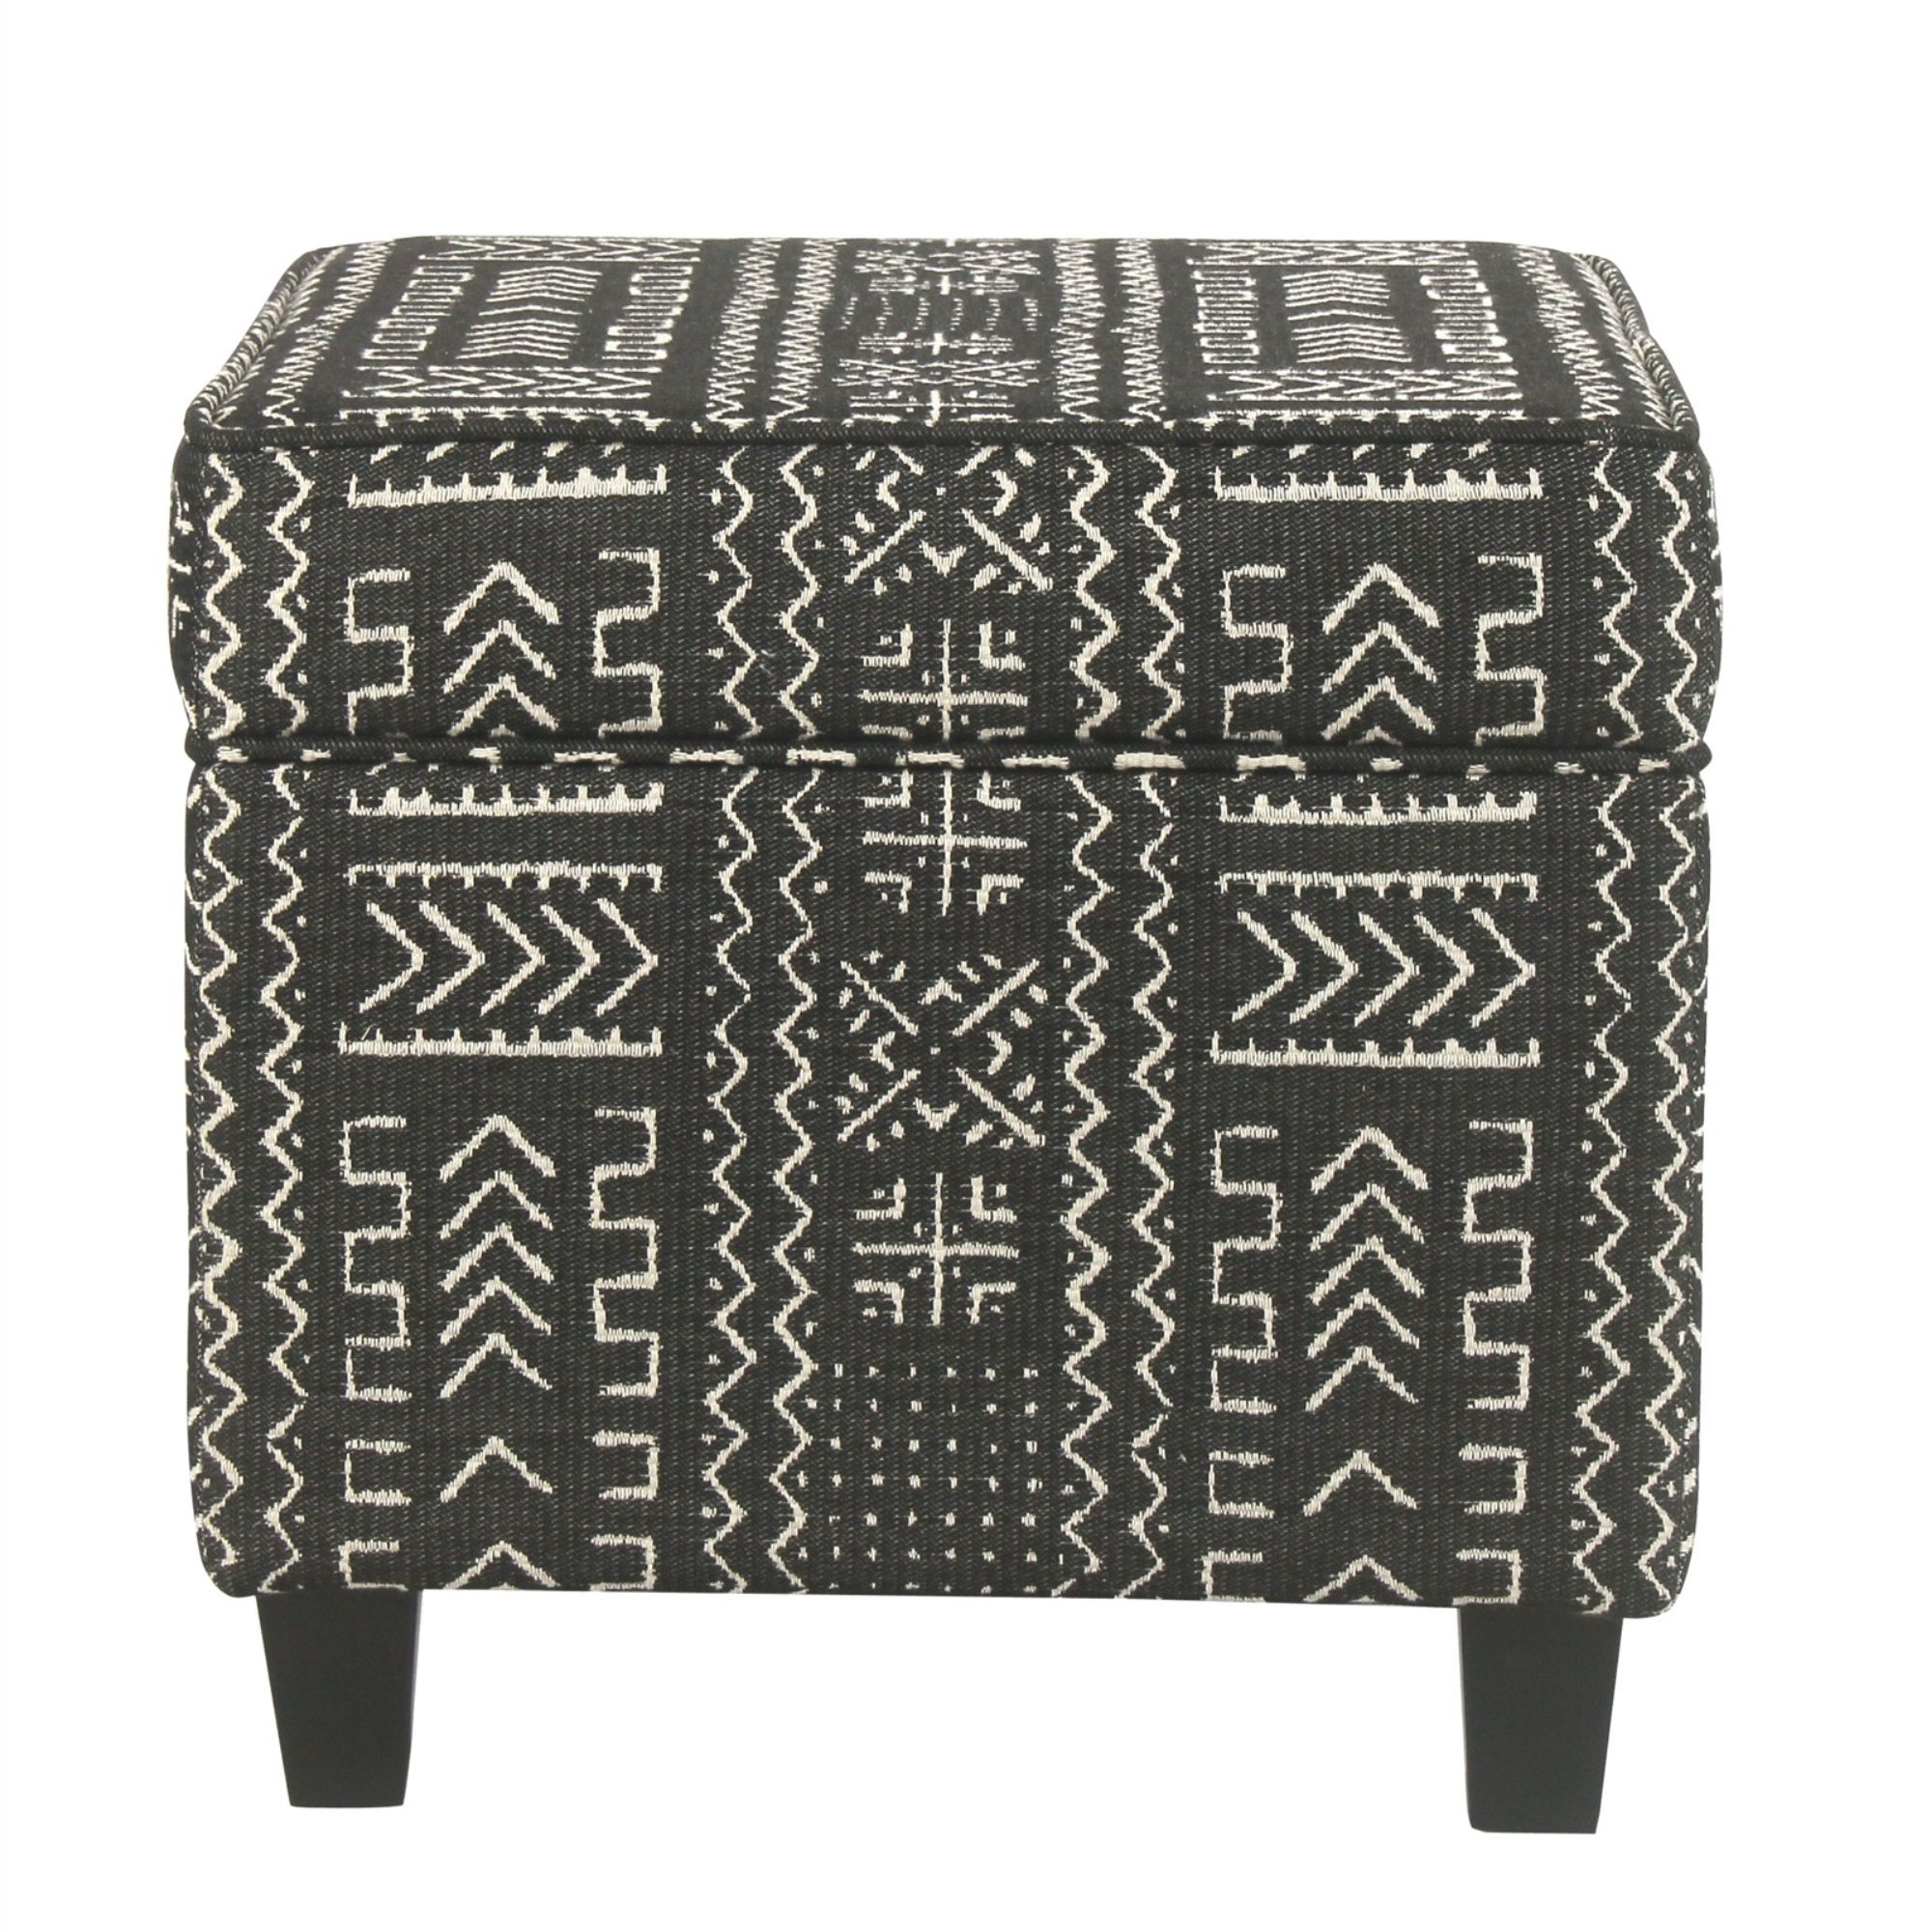 Wooden Ottoman With Tribal Patterned Fabric Upholstery And Hidden Storage,  Black And White – Walmart Inside 2020 Ottomans With Titanium Frame (View 15 of 15)